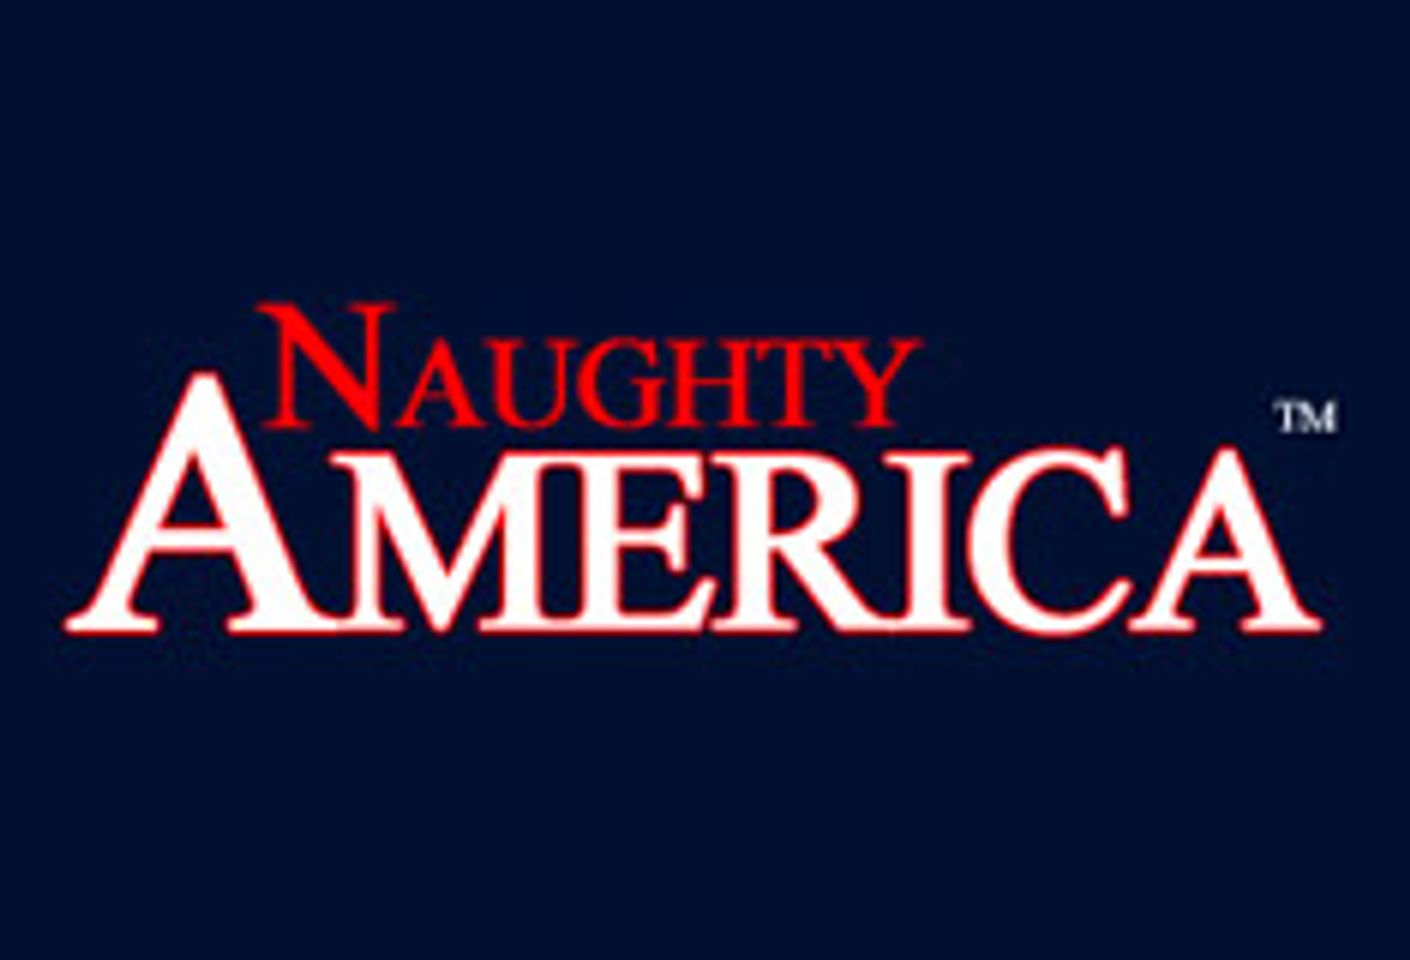 Naughty America Launches Asian1on1.com